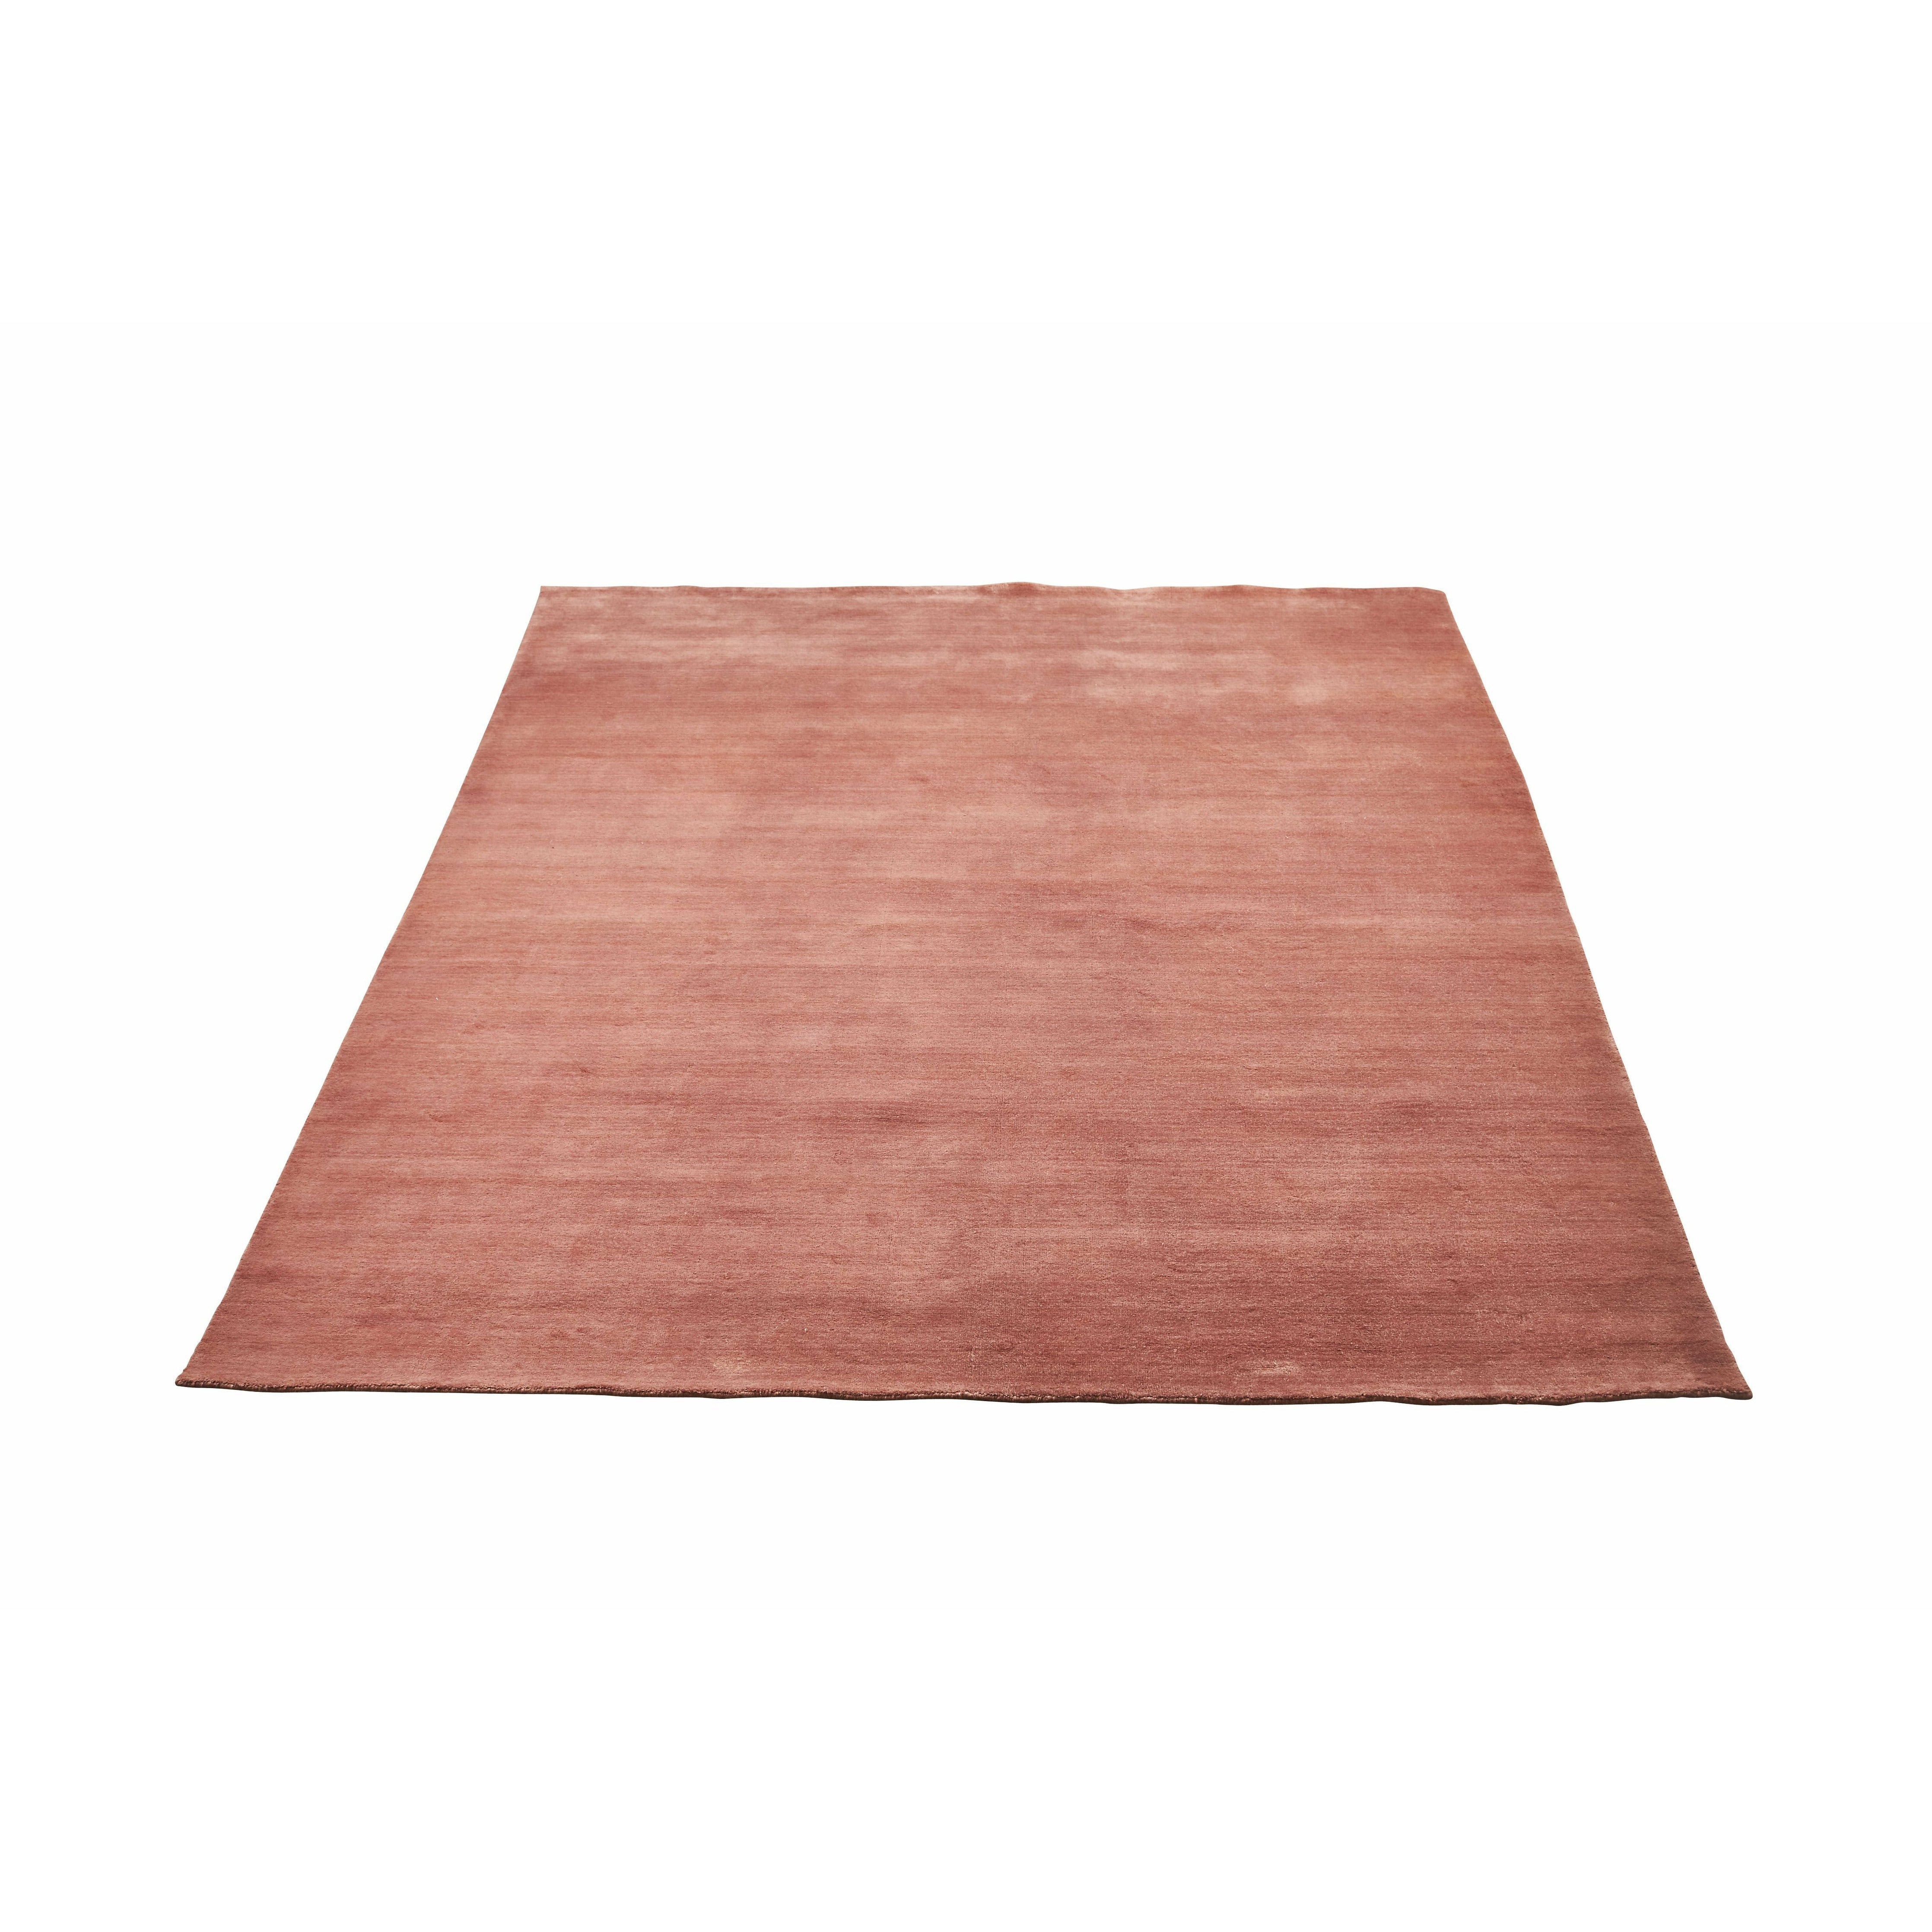 Massimo Earth Tapis Bambou Terre Cuite, 200x300 Cm